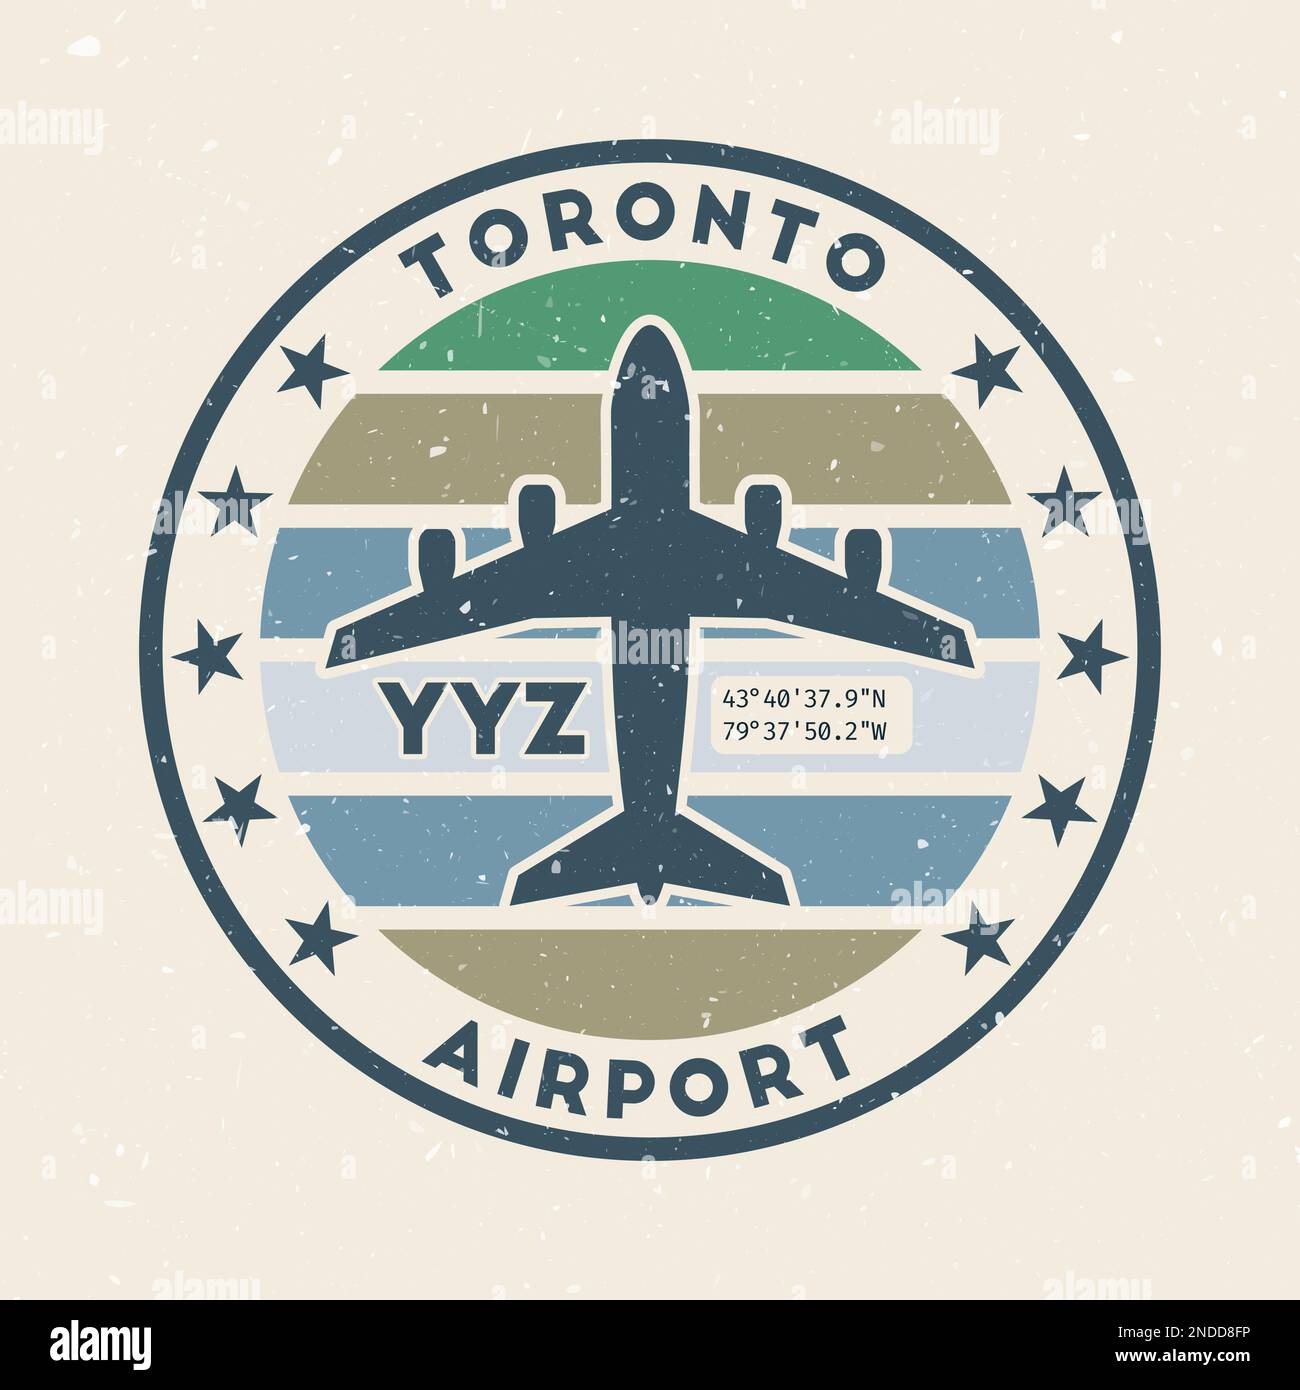 Toronto airport insignia. Round badge with vintage stripes, airplane shape, airport IATA code and GPS coordinates. Charming vector illustration. Stock Vector